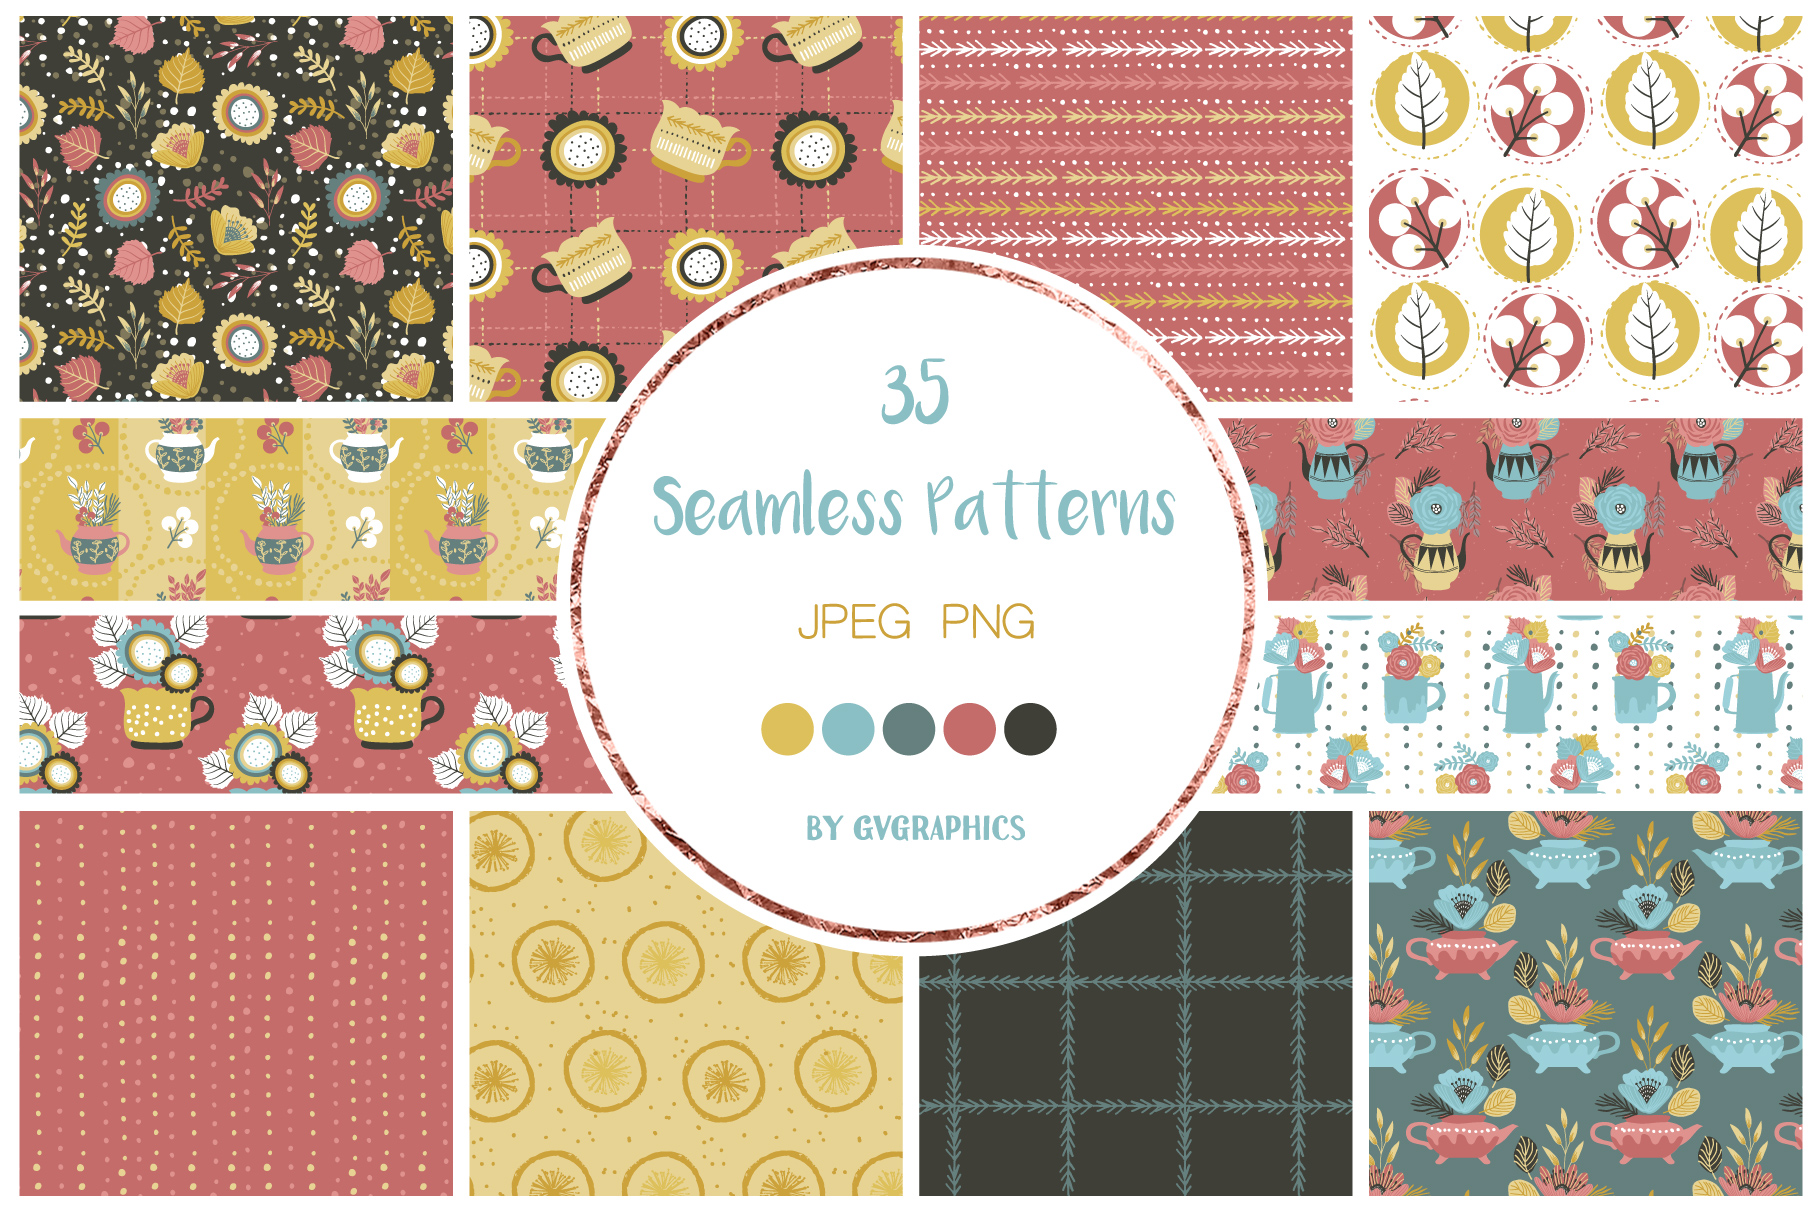 Seamless Patterns with Flowers and Teapots Repeat Picture